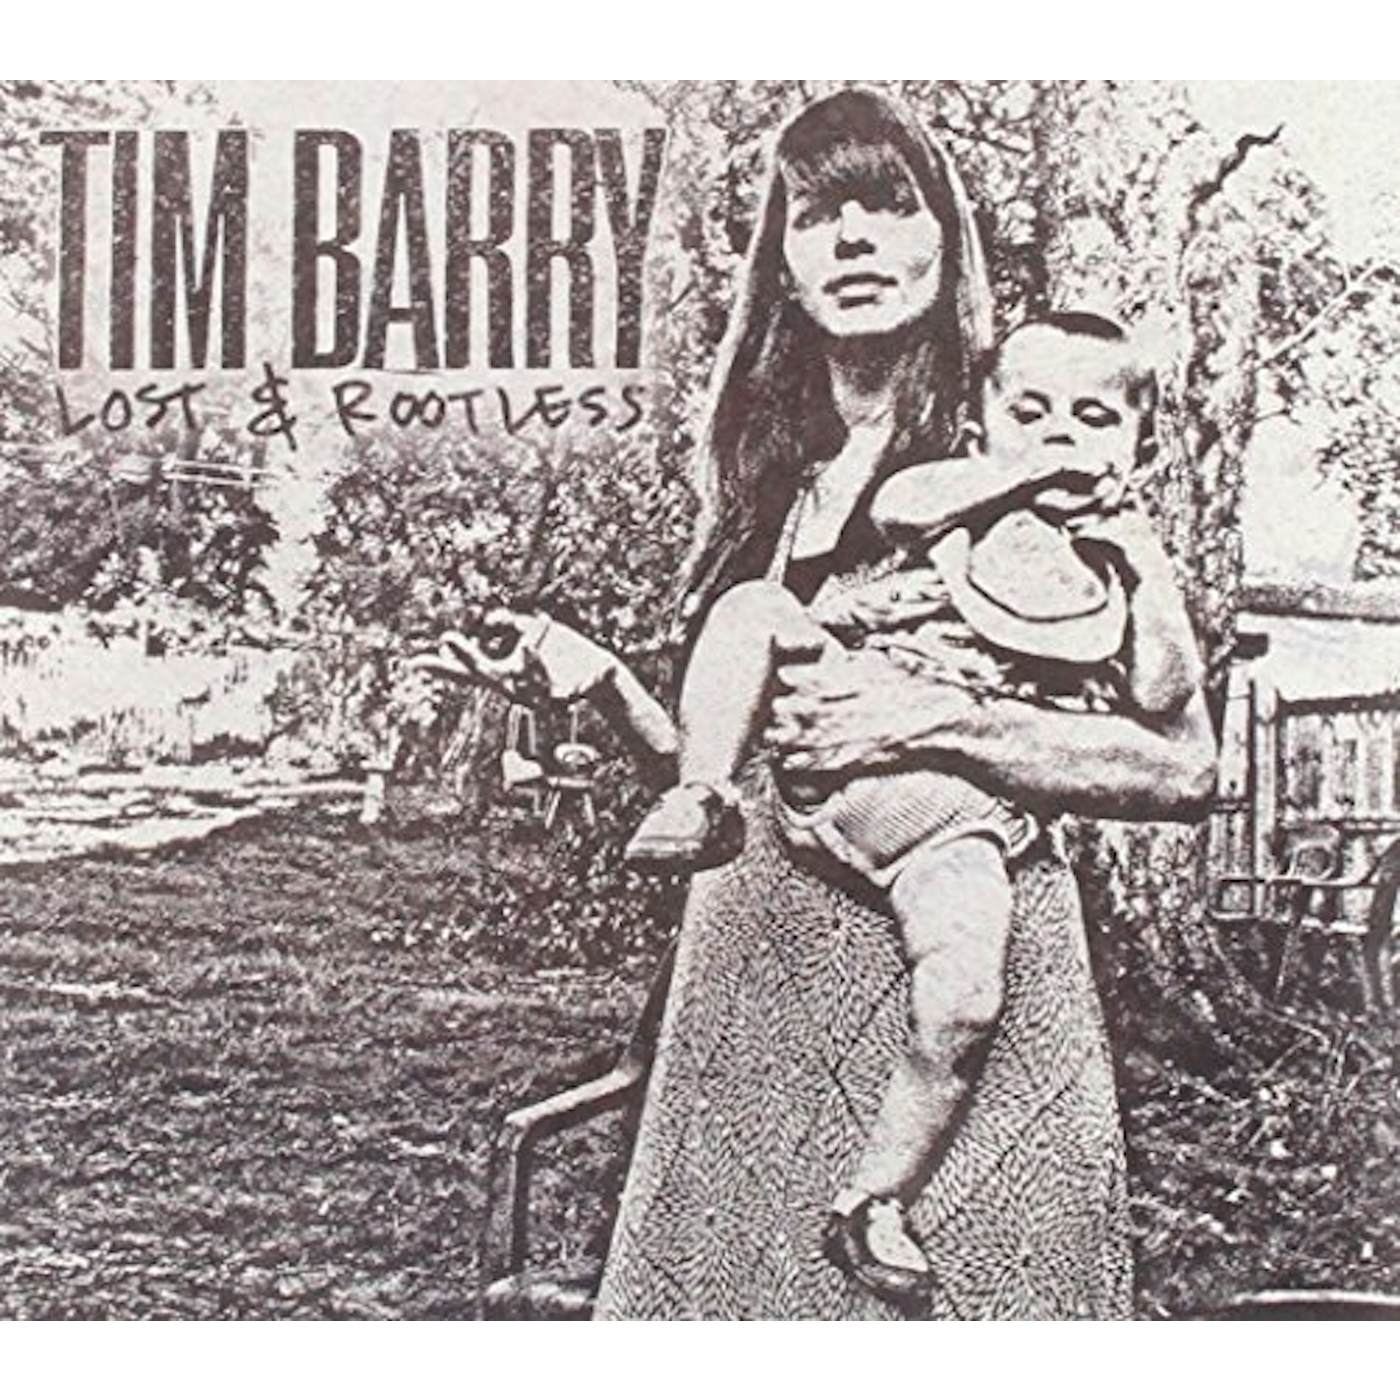 Tim Barry LOST & ROOTLESS CD